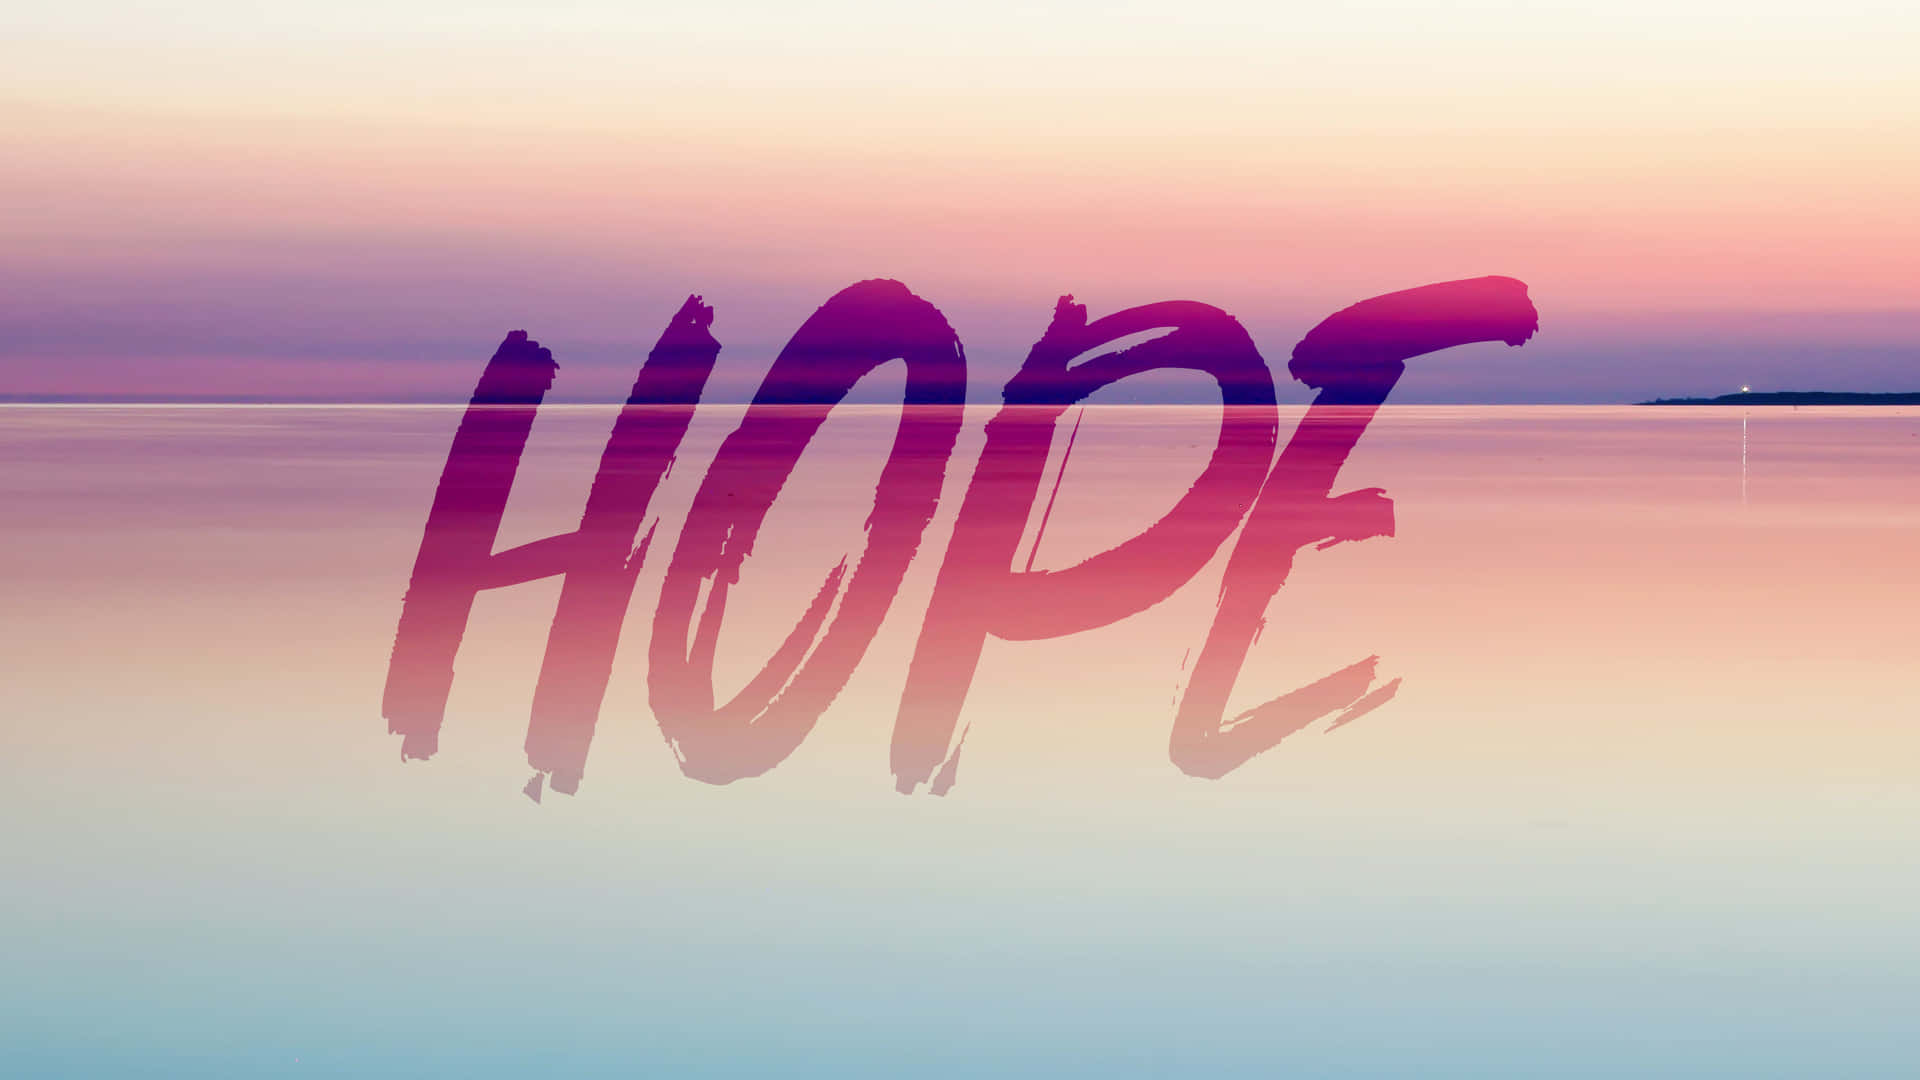 Free Hope Wallpaper Downloads, [100+] Hope Wallpapers for FREE | Wallpapers .com